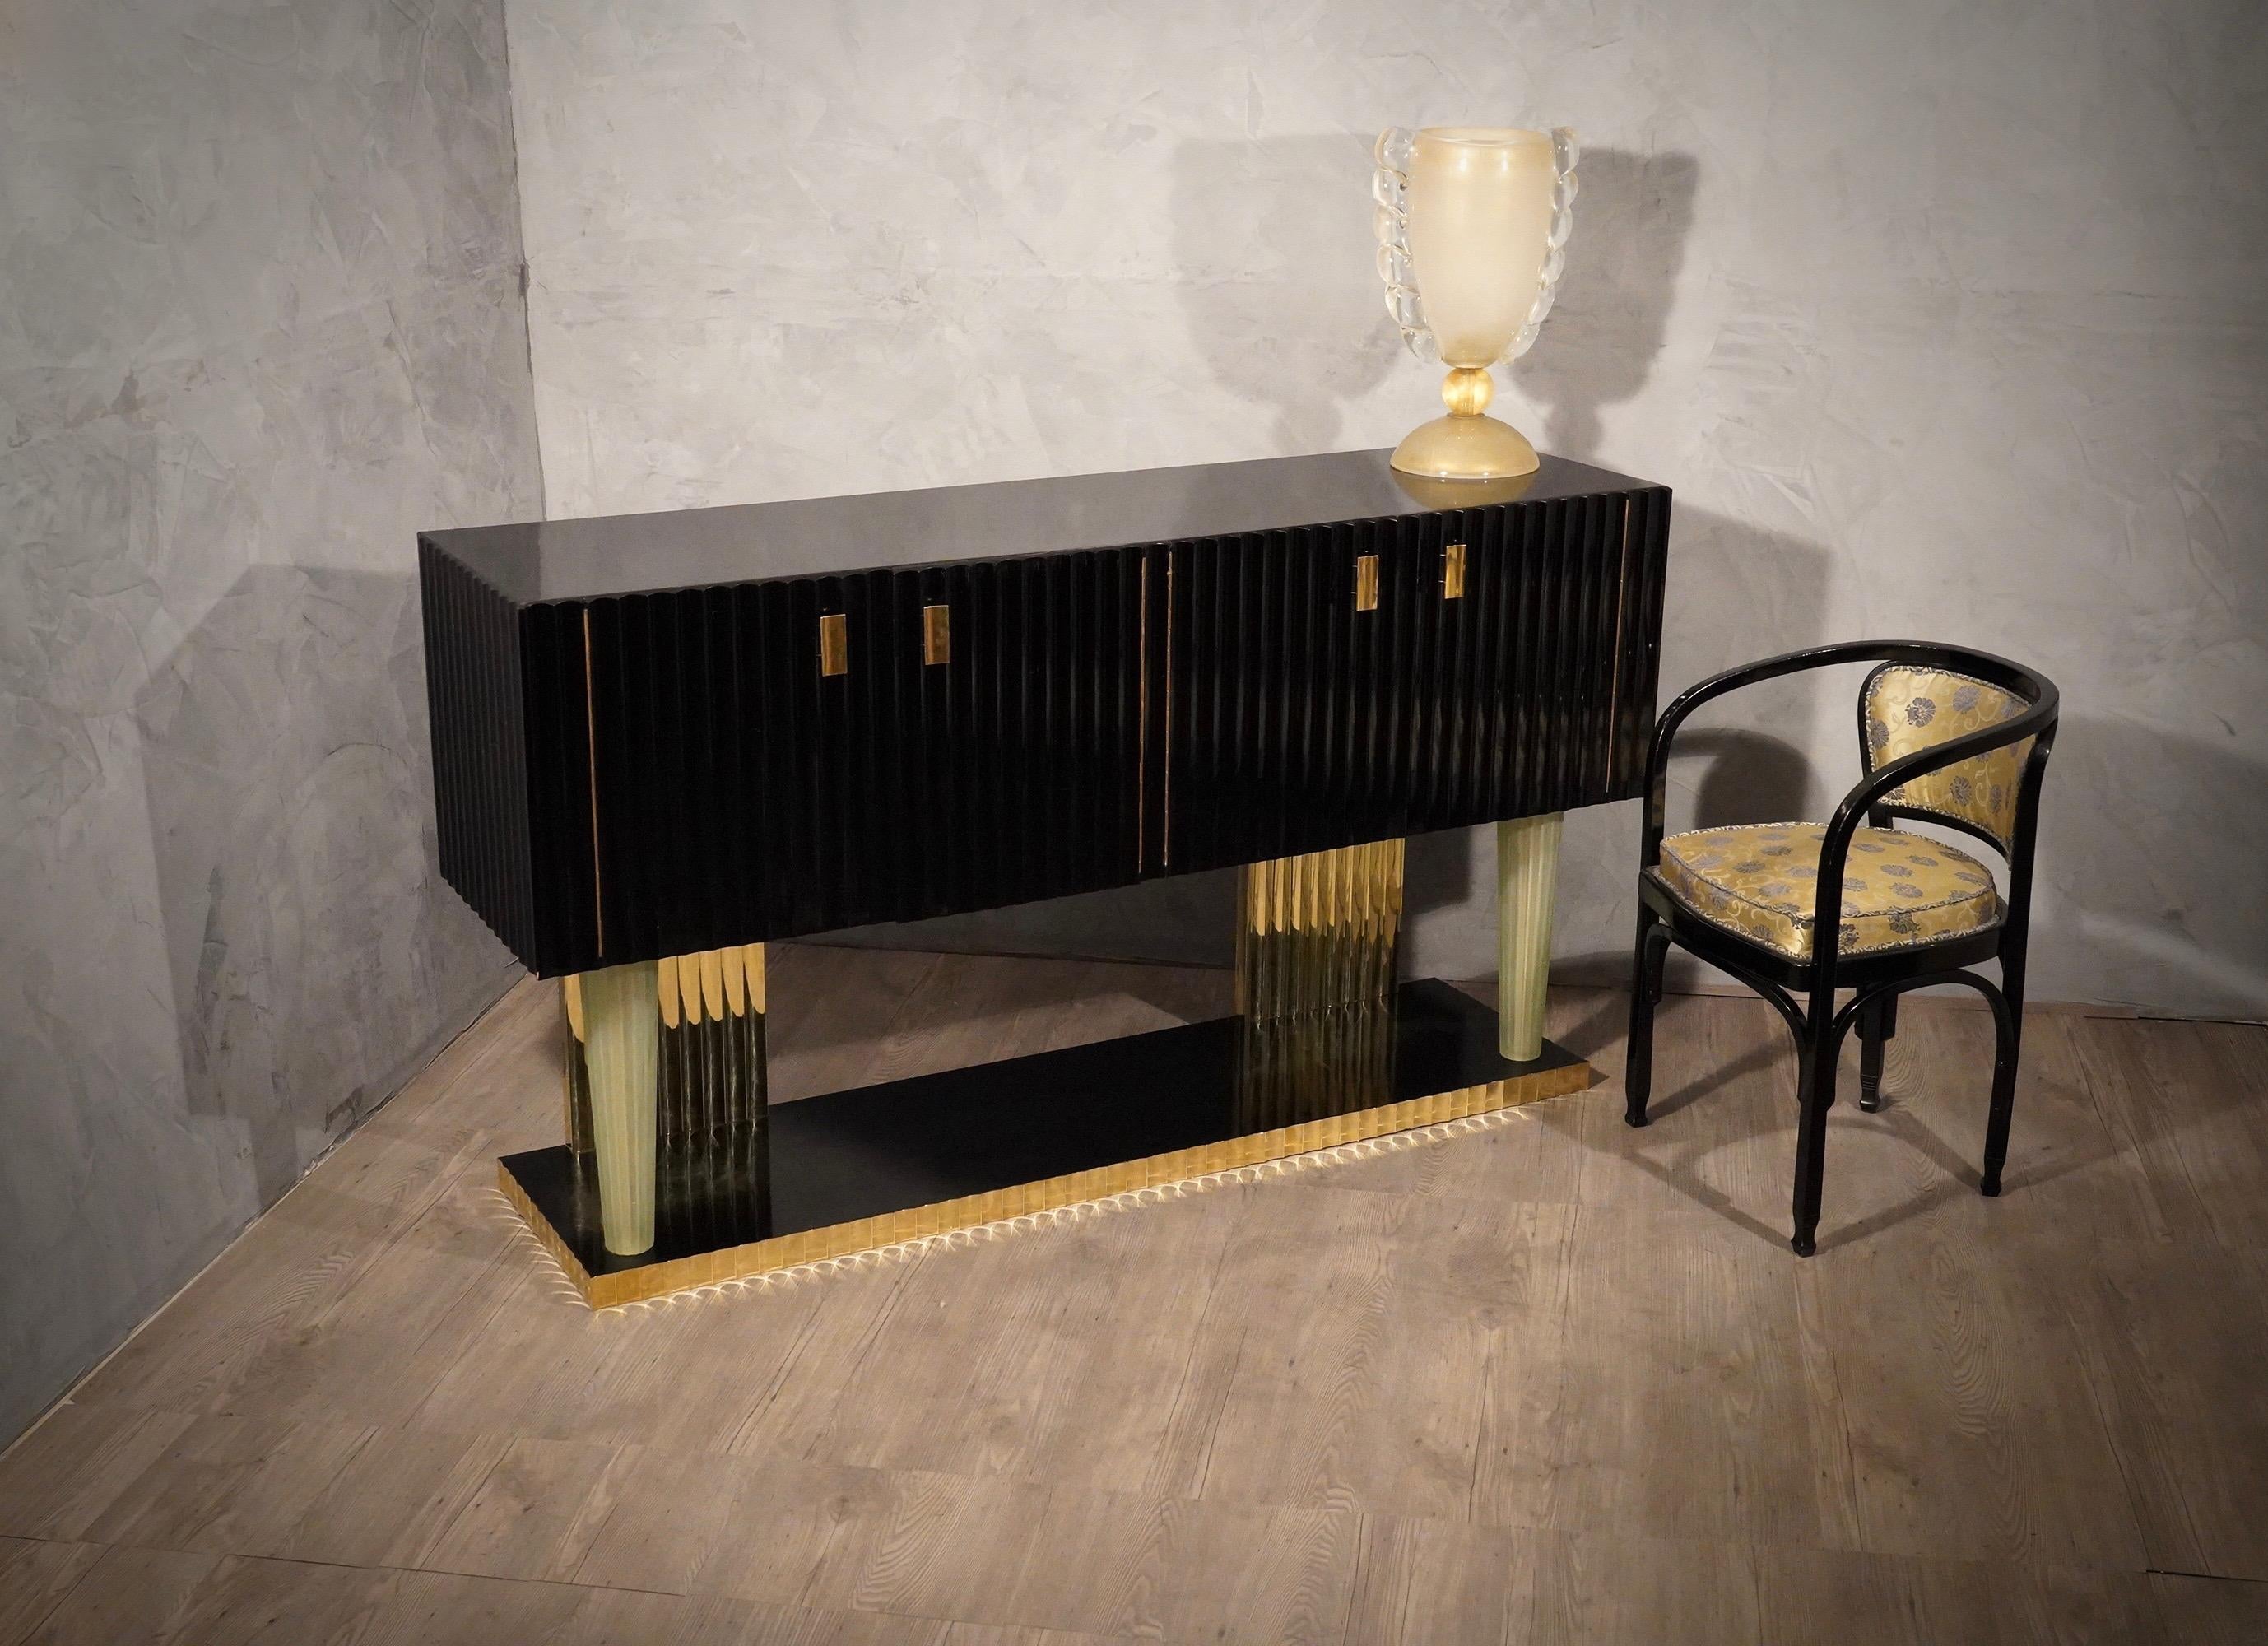 Jewel sideboards of the Art Deco period, fascinating the type of construction, with very precious materials, Murano glass, brass and black polished wooden shells.

The sideboard has a wooden structure polished in black shellac, as you can see from